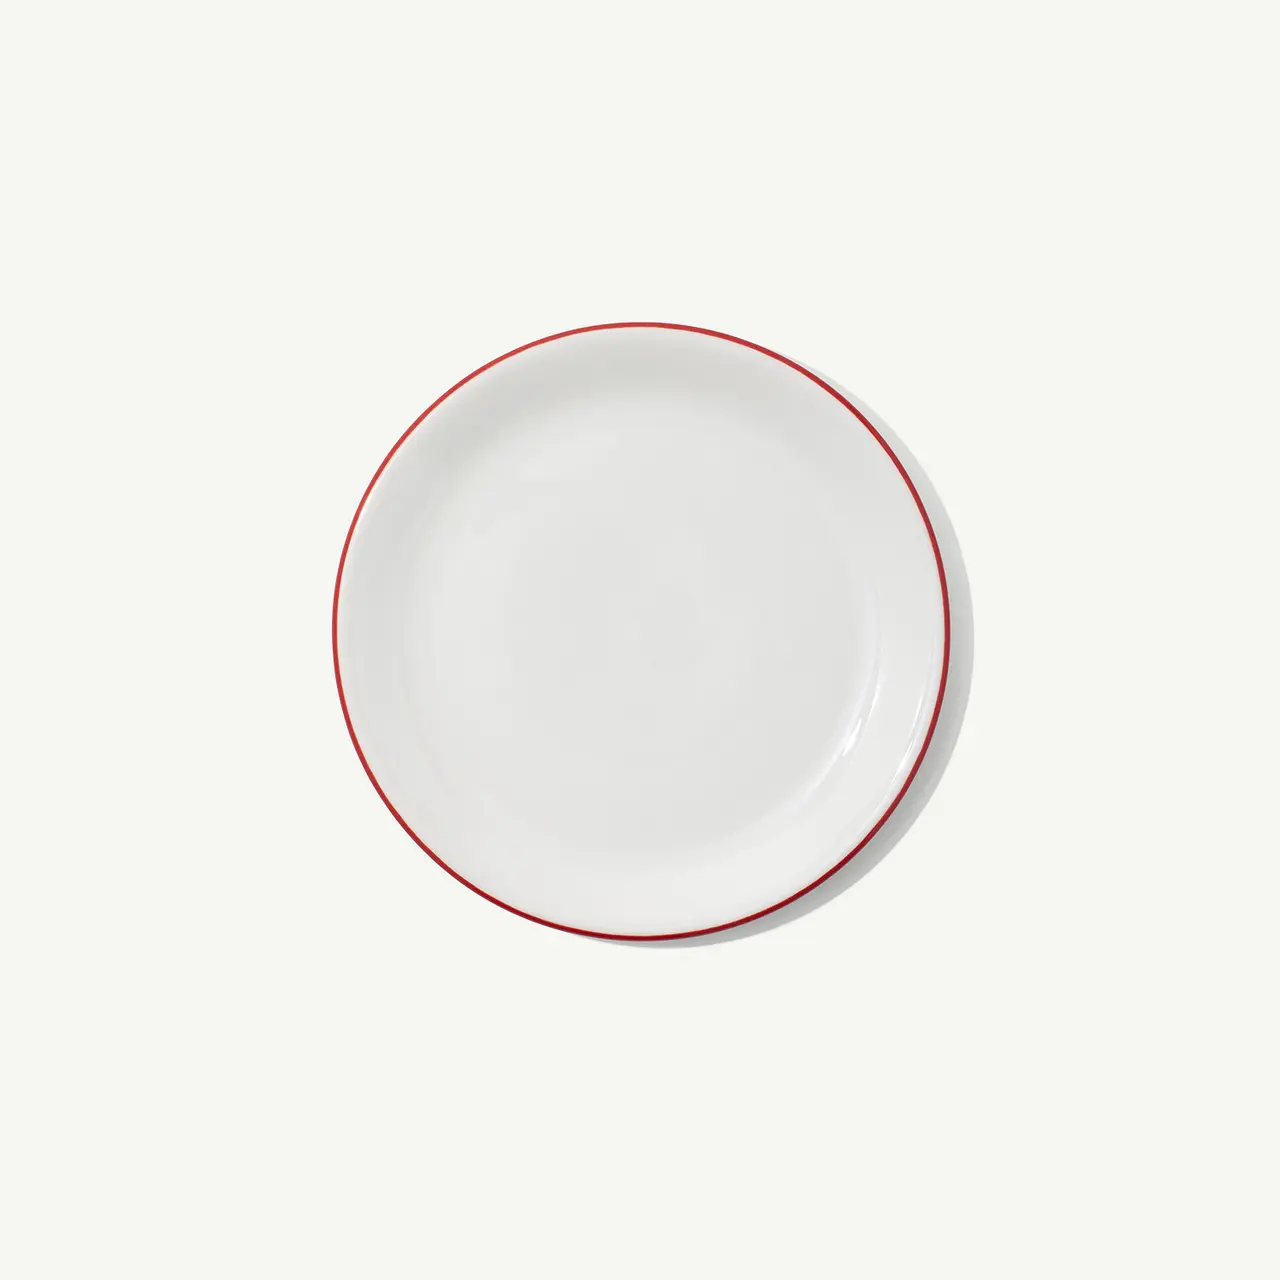 A white round plate with a red rim on a plain background.